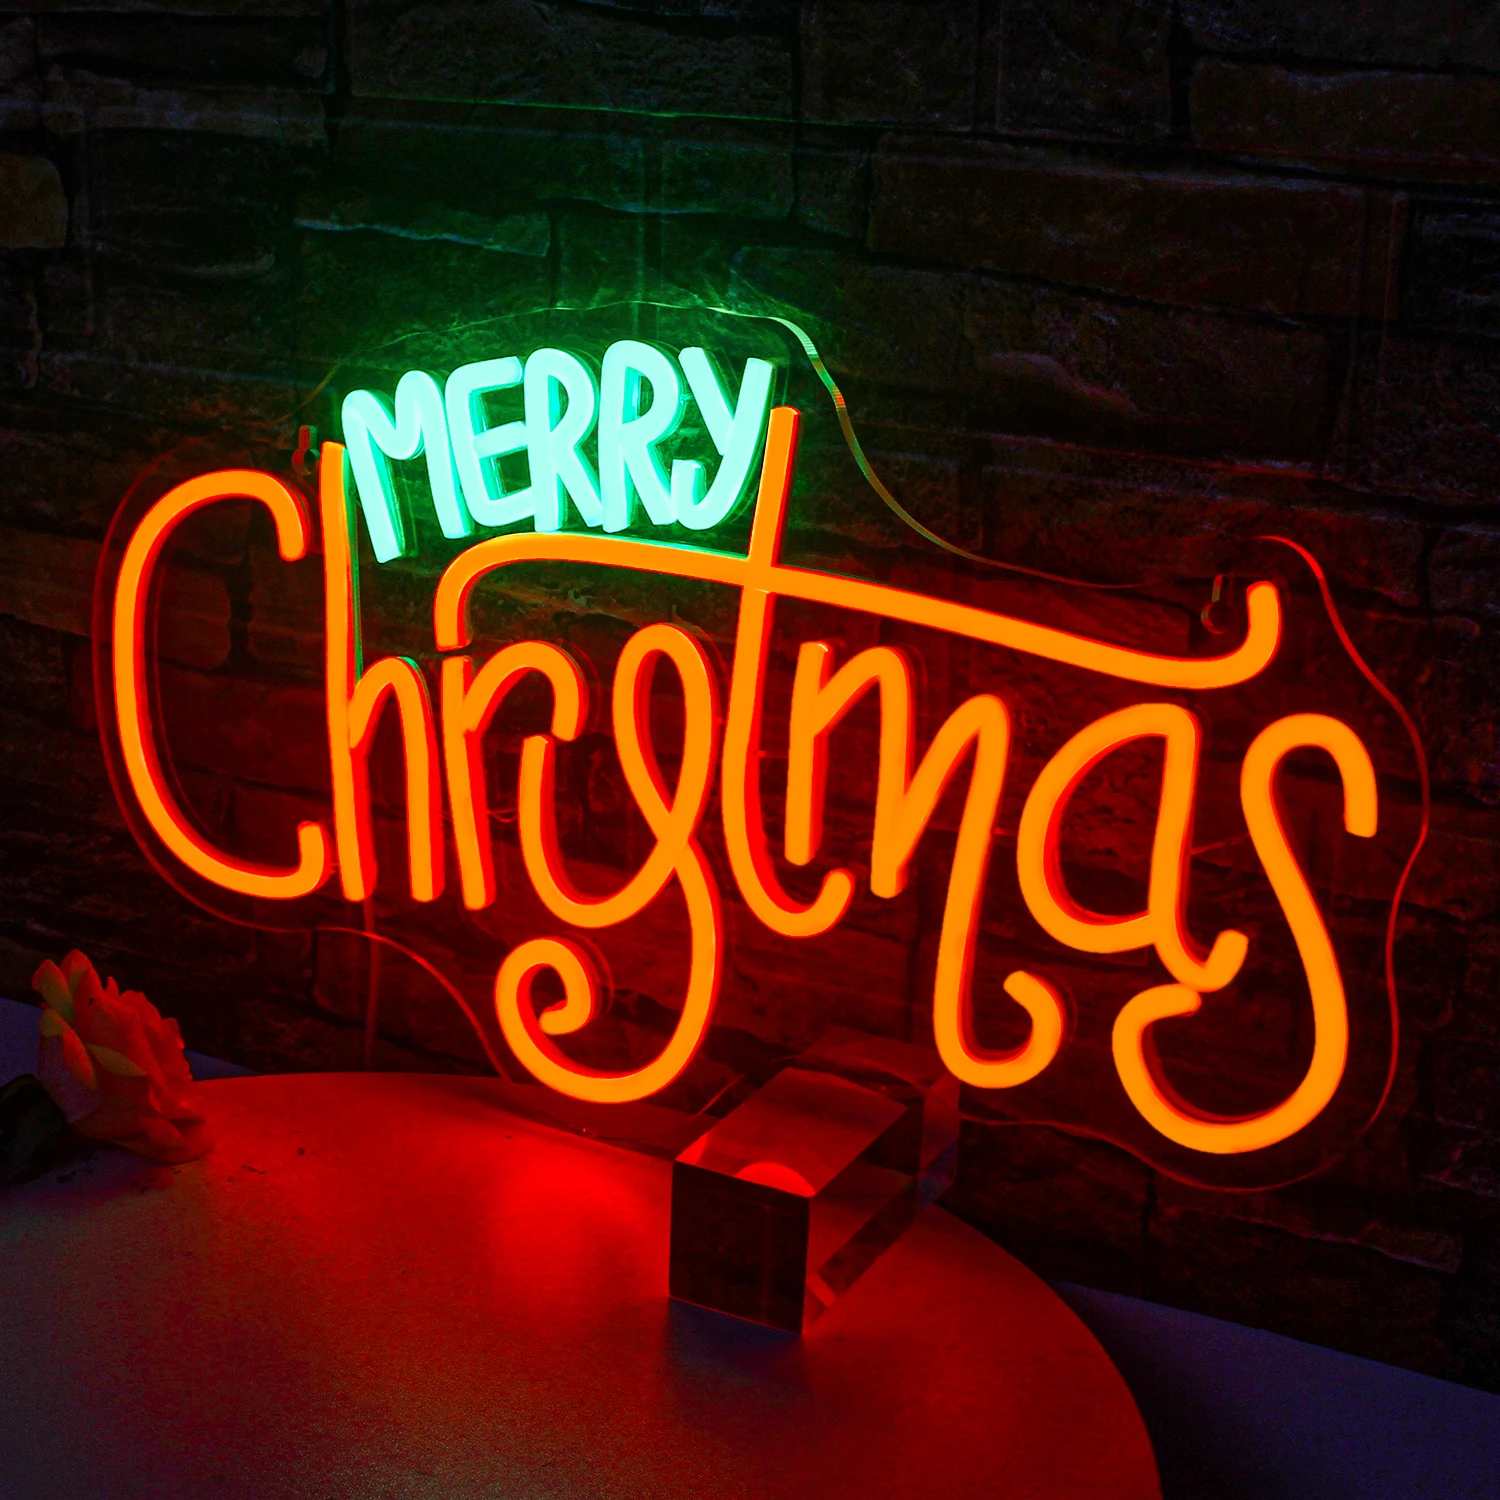 Merry Christmas Neon Sign Led Neon Light Wall Decor Usb Light Up Sign Bedroom Home Party Christmas Decorations Family Kids Gifts santa neon led sign christmas neon sign lighting family room bedroom wall decor holiday party night lights cool kids girls gifts